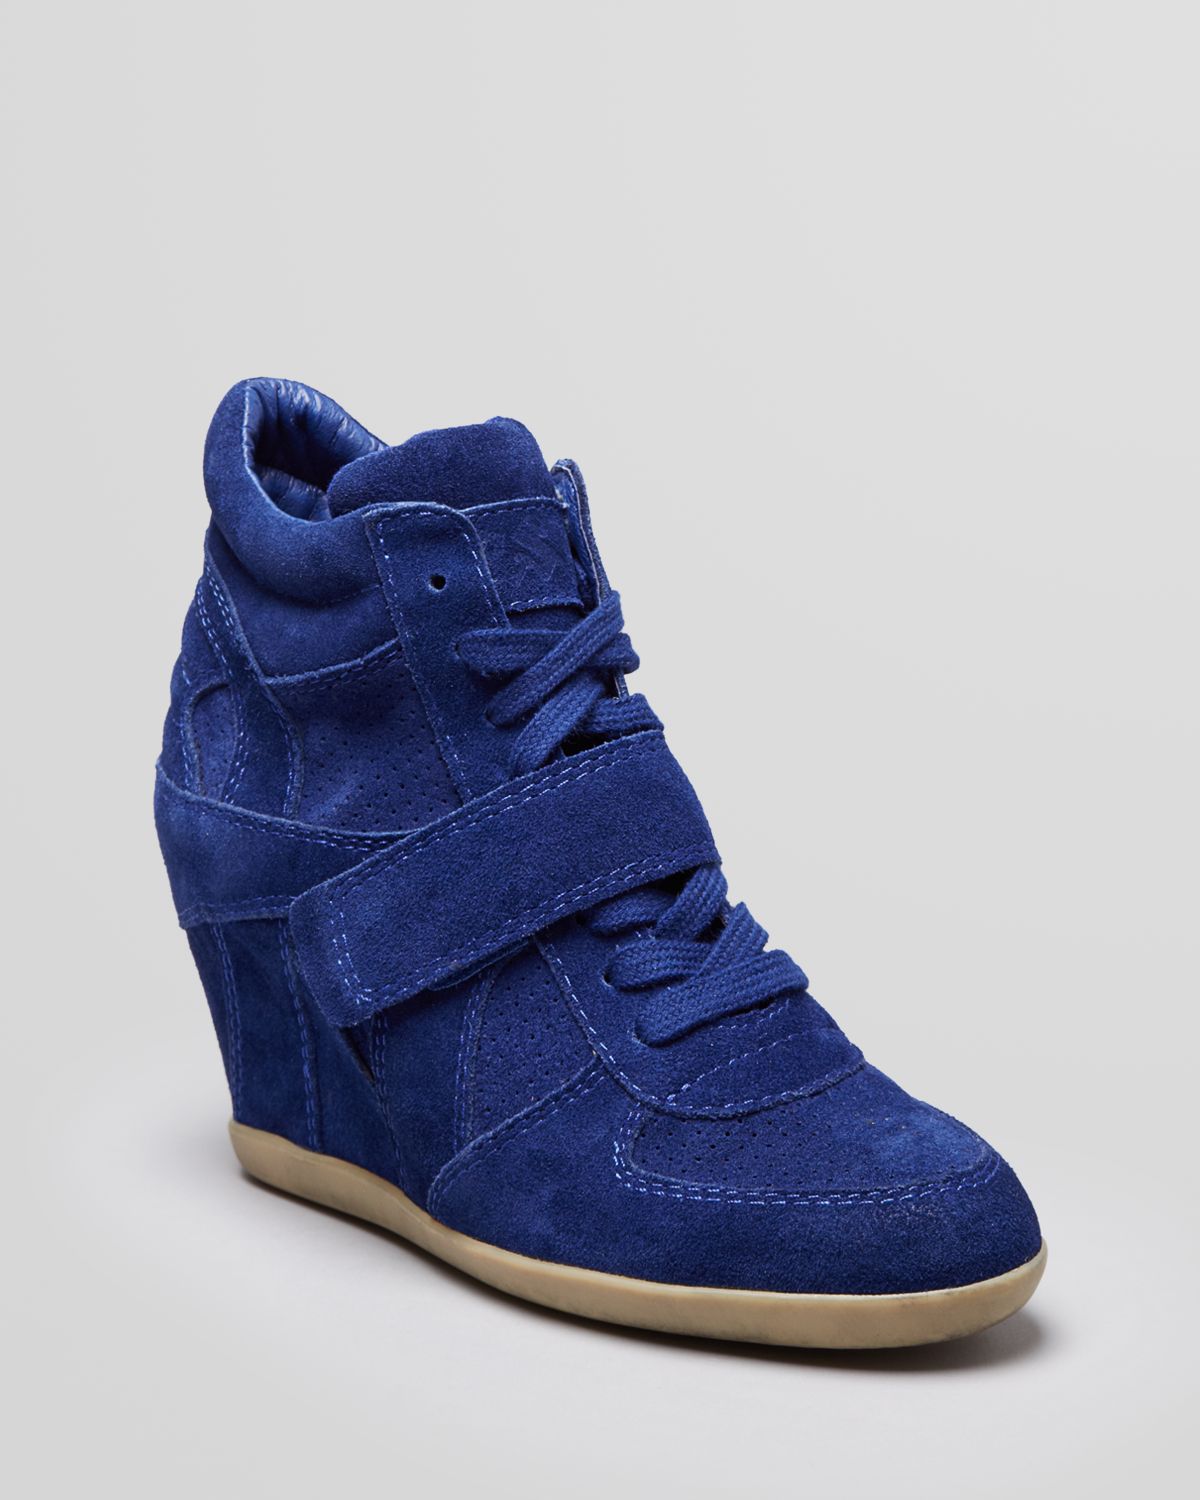 Ash Lace Up High Top Wedge Sneakers Bowie in Blue (Cobalt) | Lyst